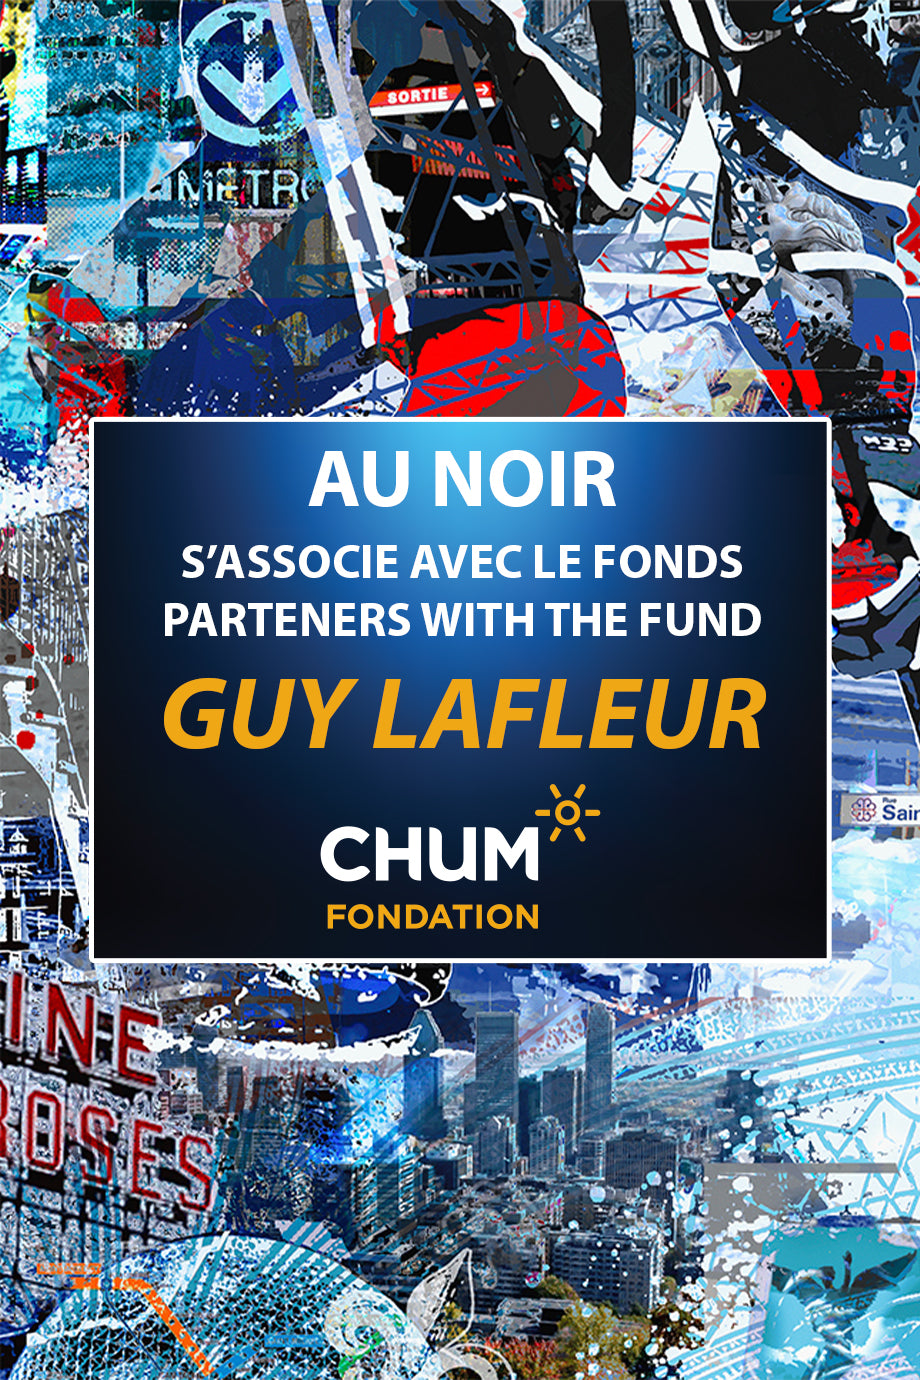 Guy-Lafleur | A donation for the cause